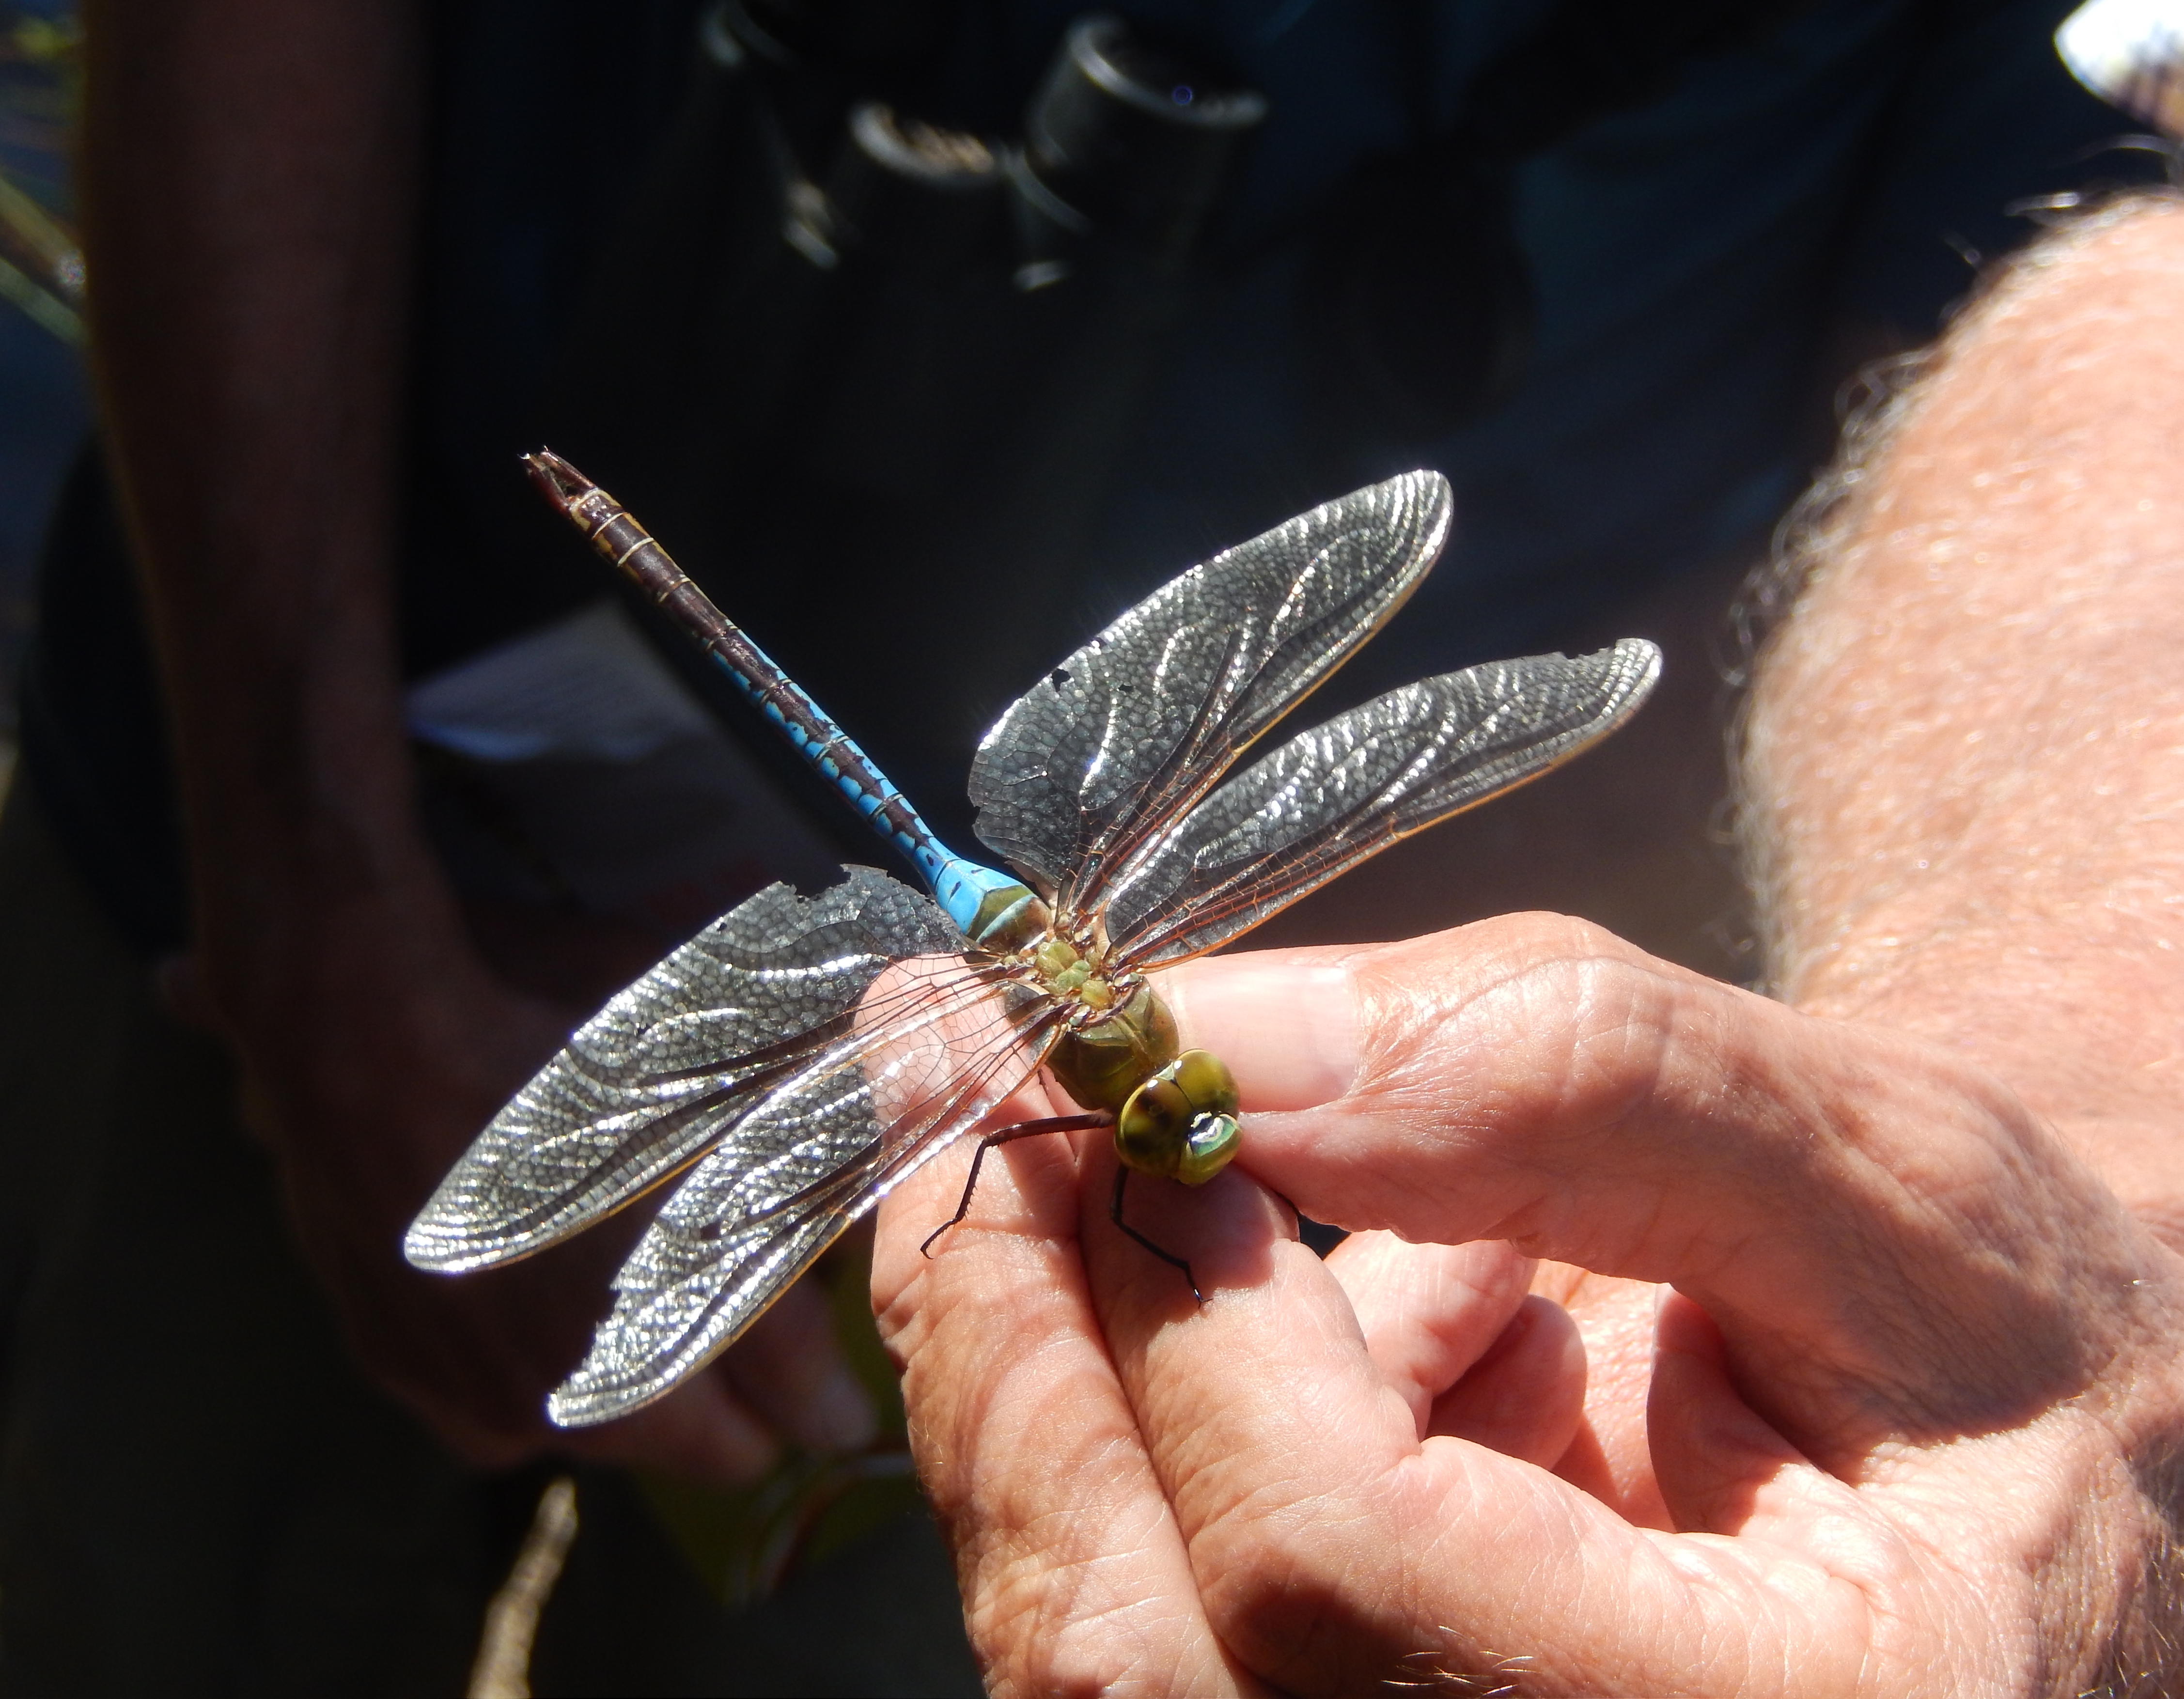 A dragonfly perches on someone's hand.